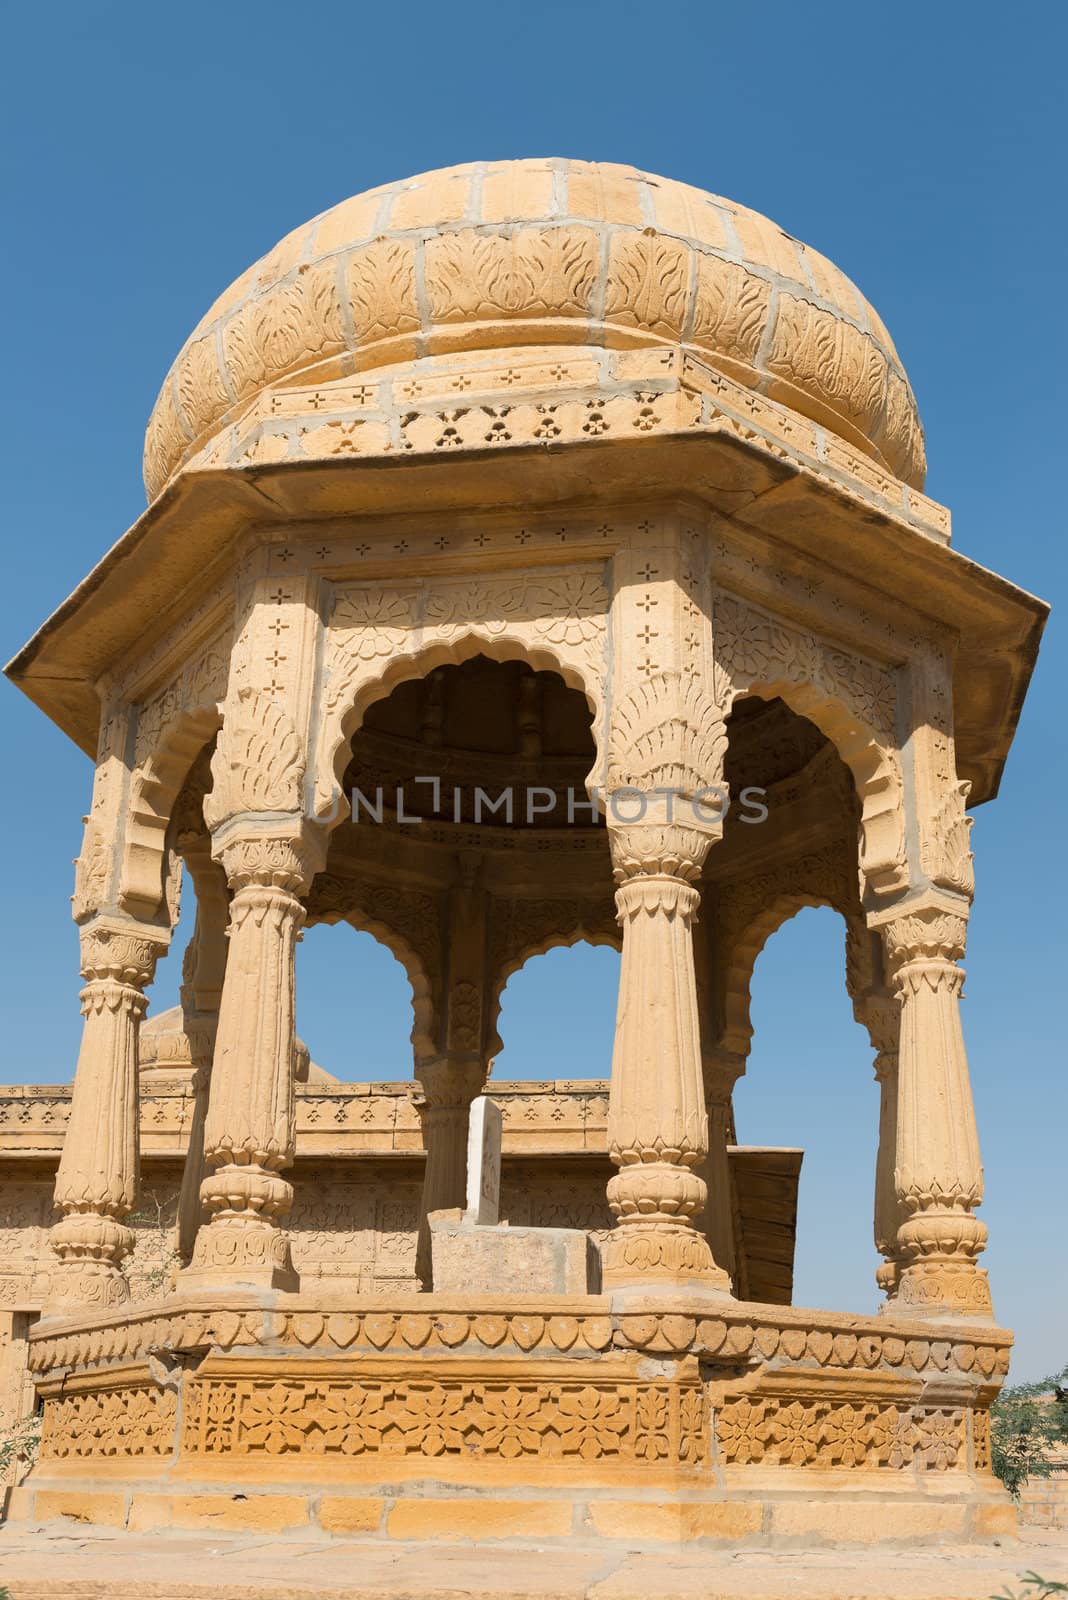 Royal cenotaphs with floral ornament, India by iryna_rasko